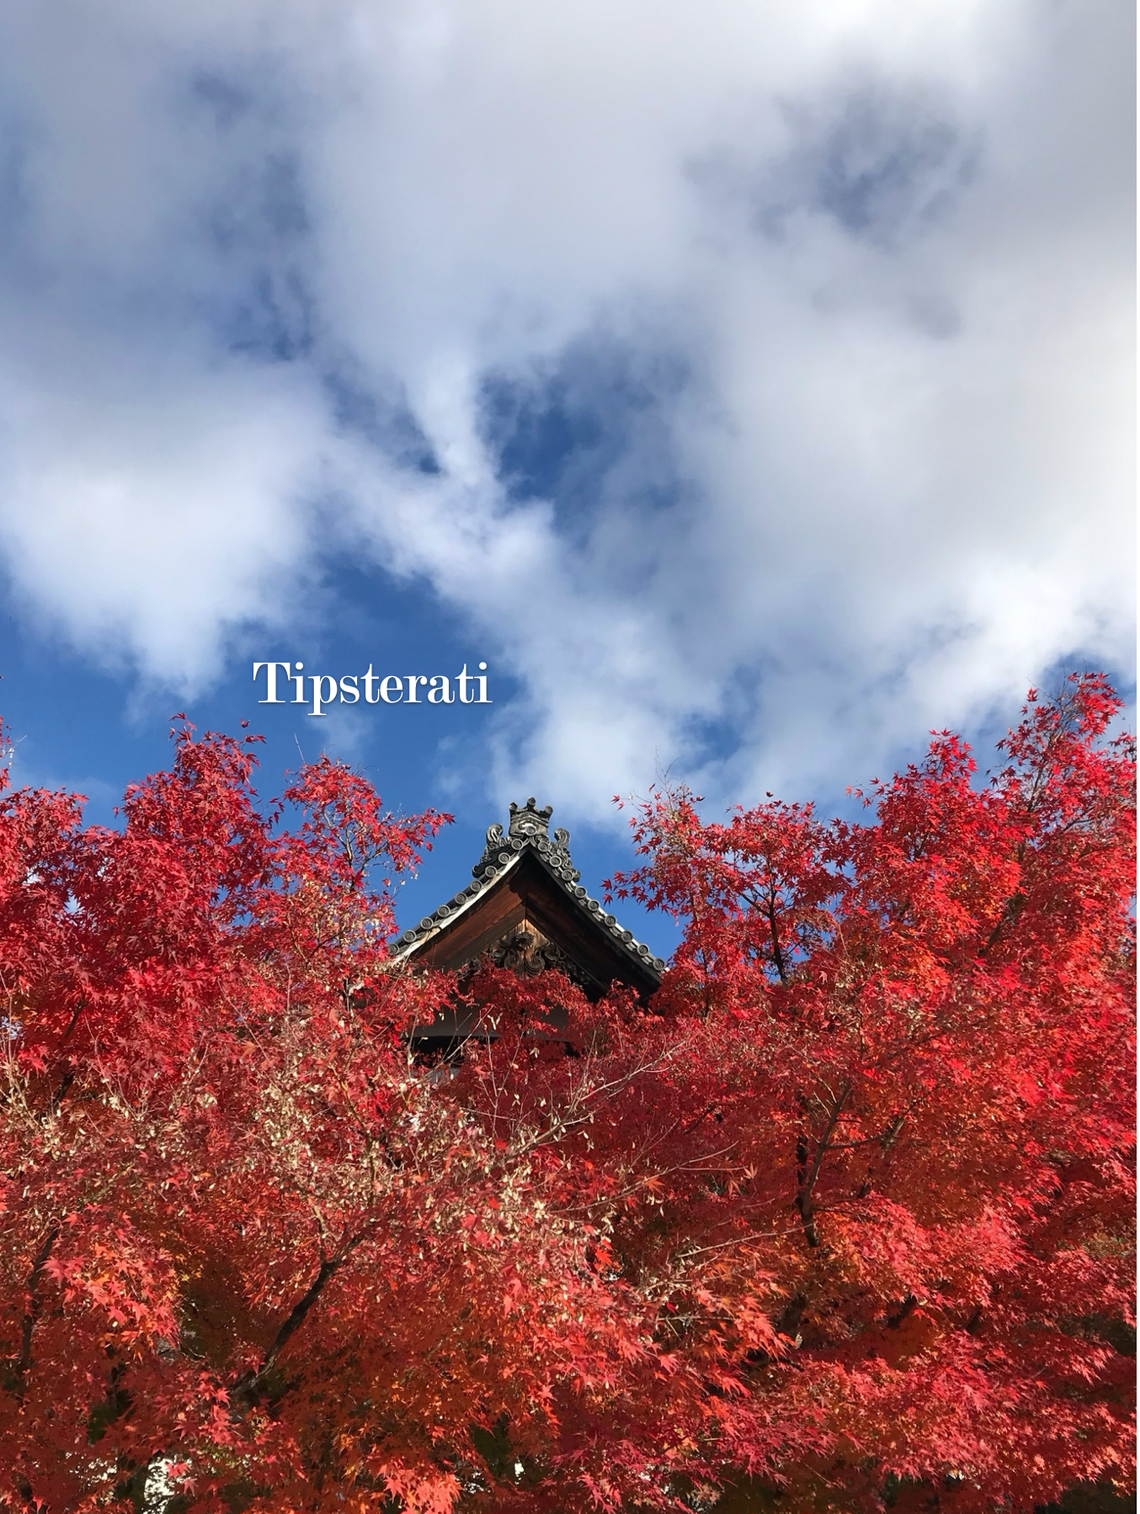 The pointed tip of a Japanese roof peeks out behind red autumn foliage, with a blue sky dotted with clouds above. 